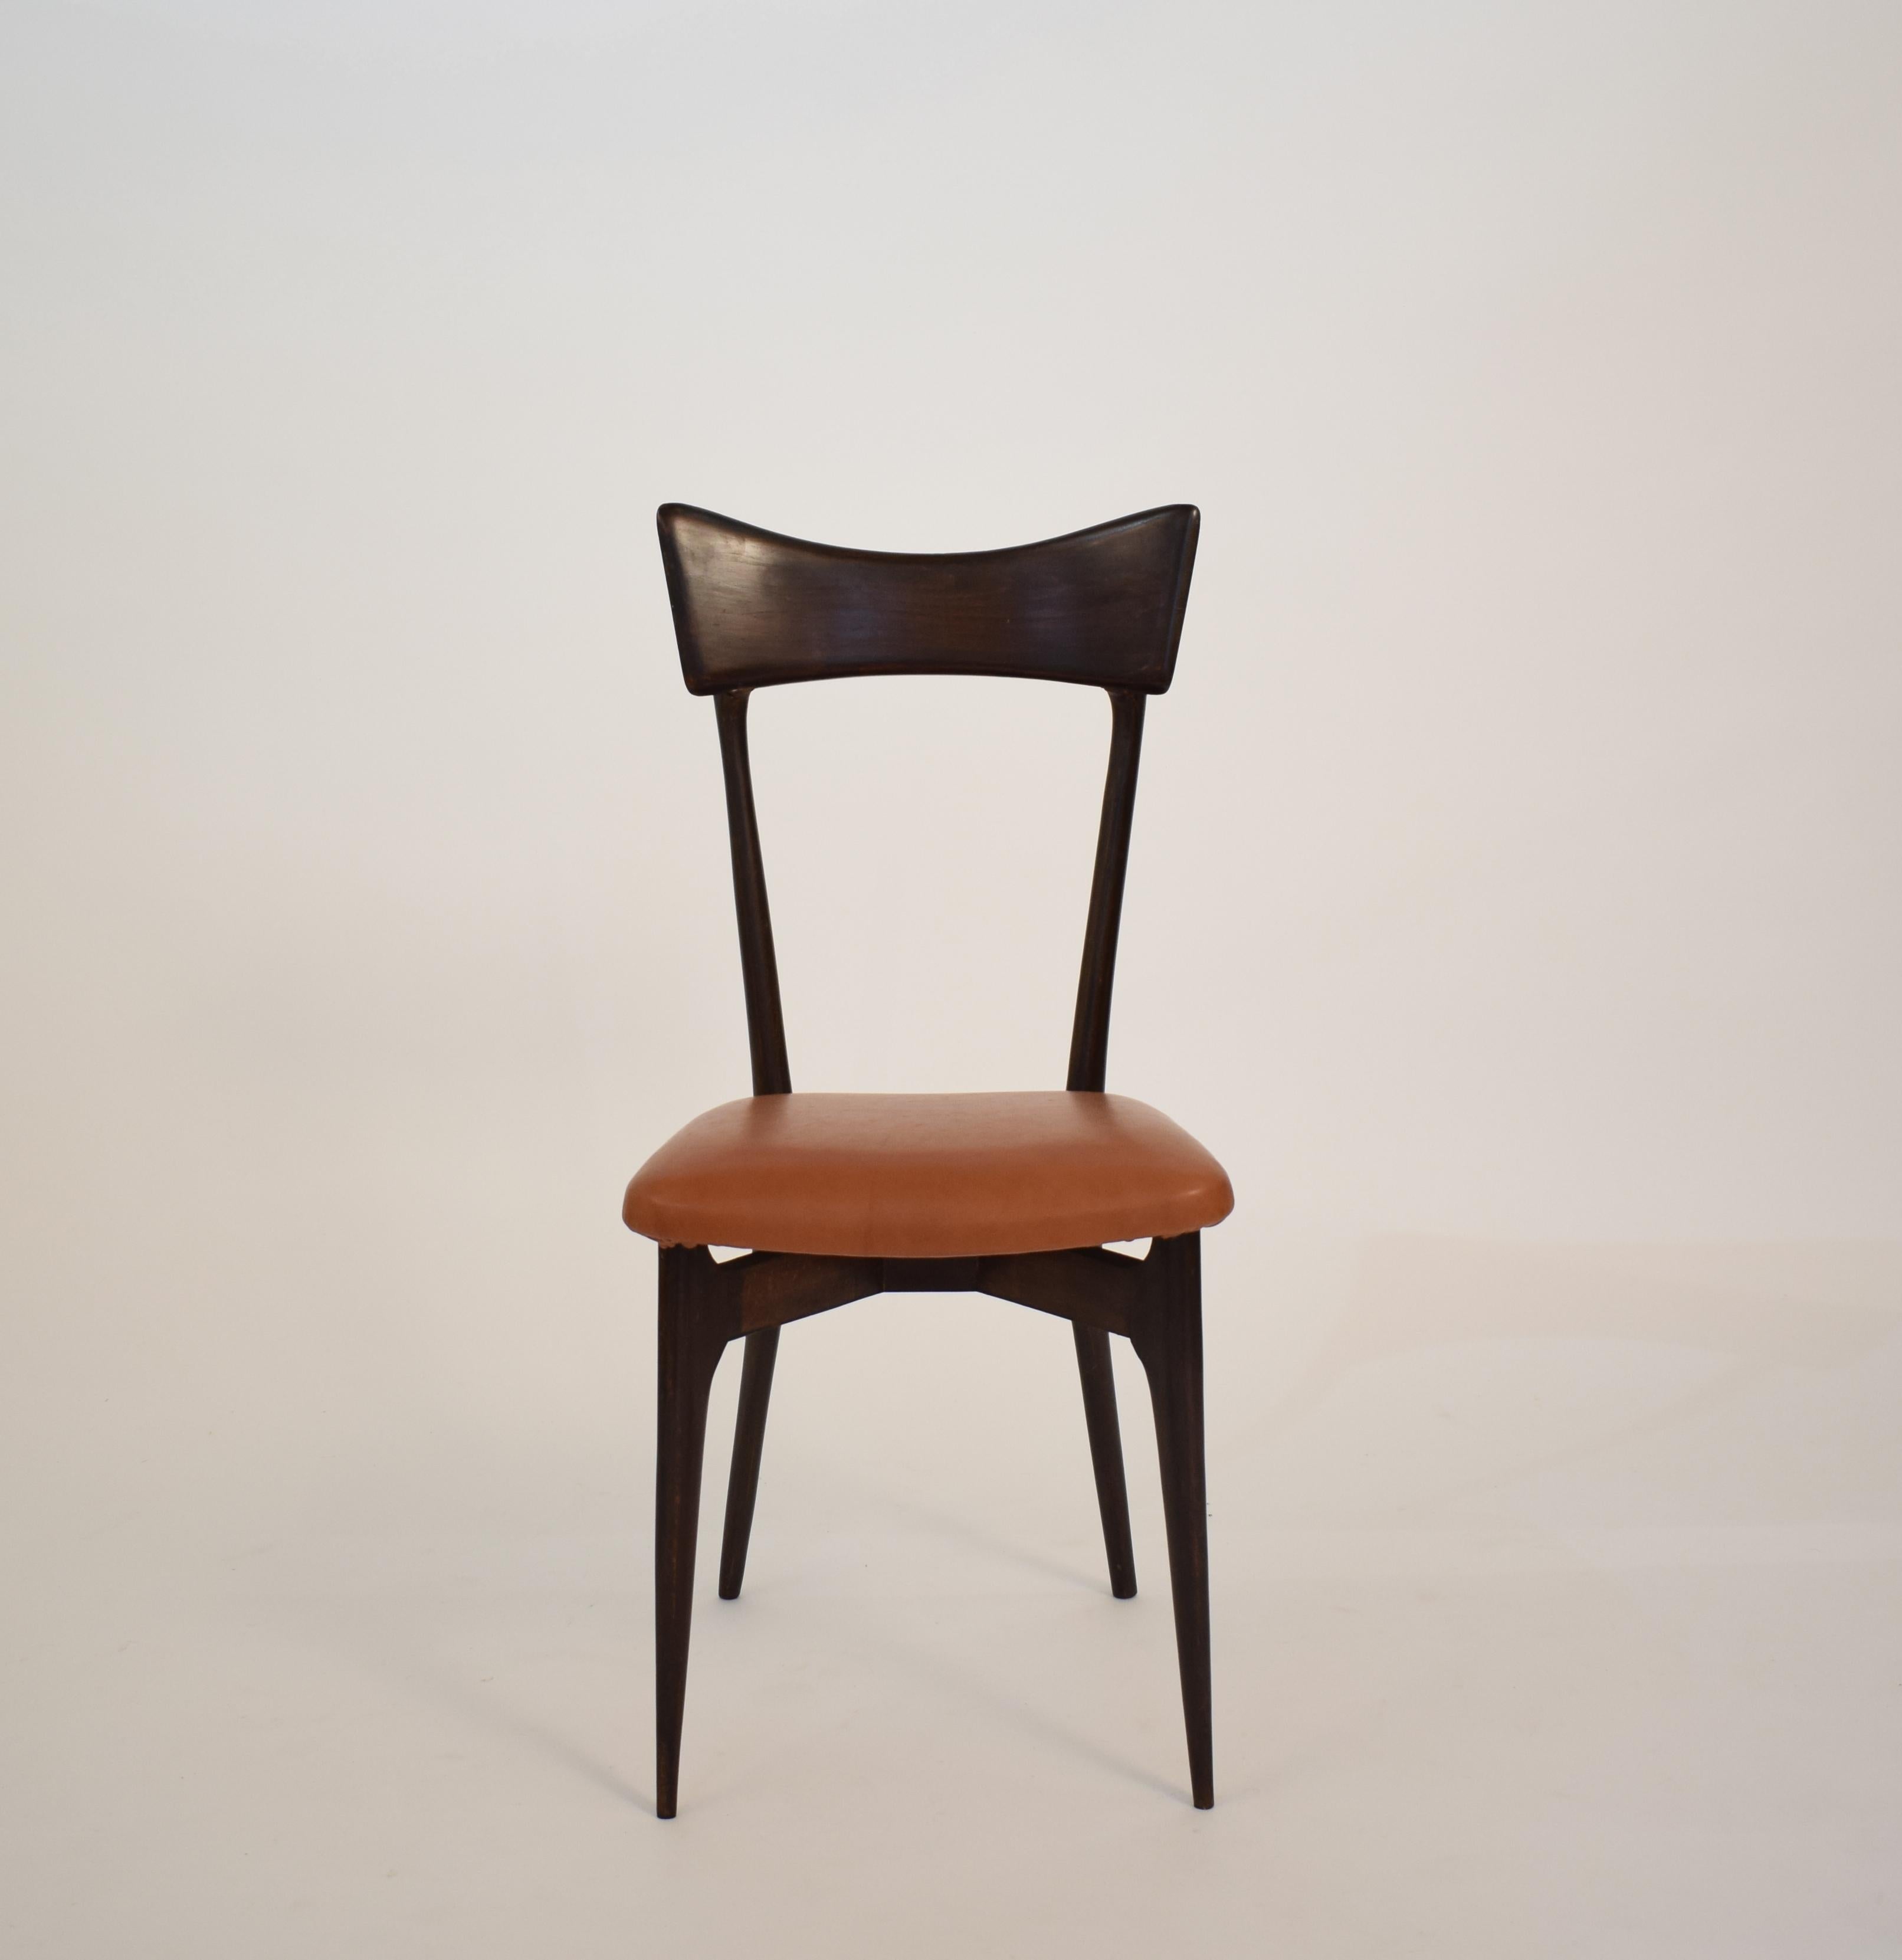 Italian Set of Six Dining Chairs with Cognac Leather by Ico Parisi for Colombo, 1950